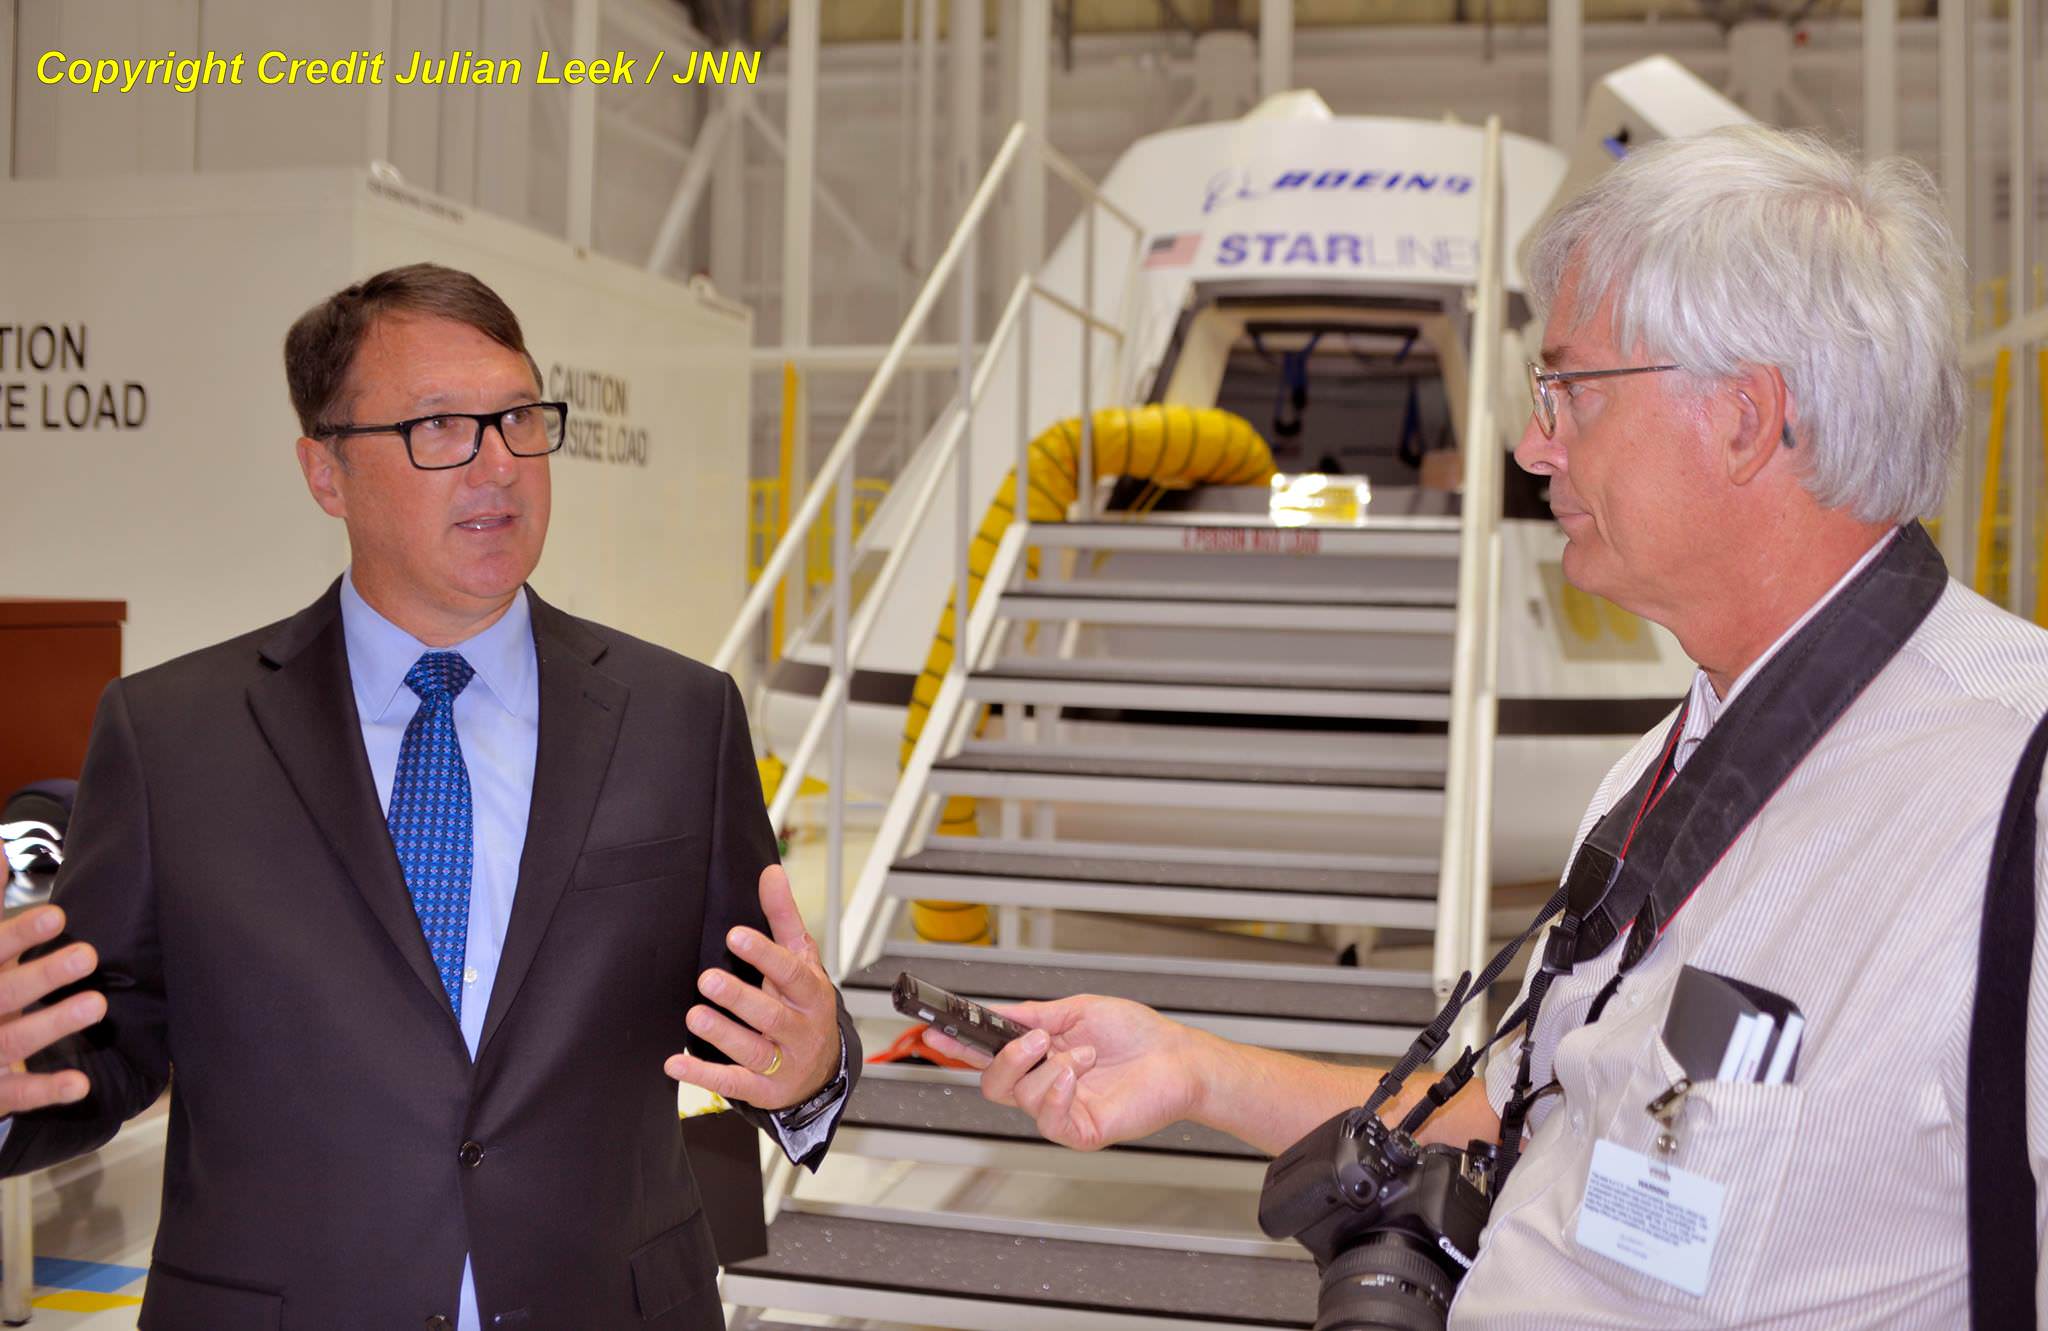 John Mulholland, vice president and program manager of Boeing Commercial Programs, and Ken Kremer, Universe Today, discuss status and assembly of 1st flightworthy Boeing Starliner by the new Starliner mockup in the Commercial Crew and Cargo Processing Facility high bay at NASA’s Kennedy Space Center in Florida.  Starliner will transport US astronauts to the ISS by 2018.  Credit: Julian Leek